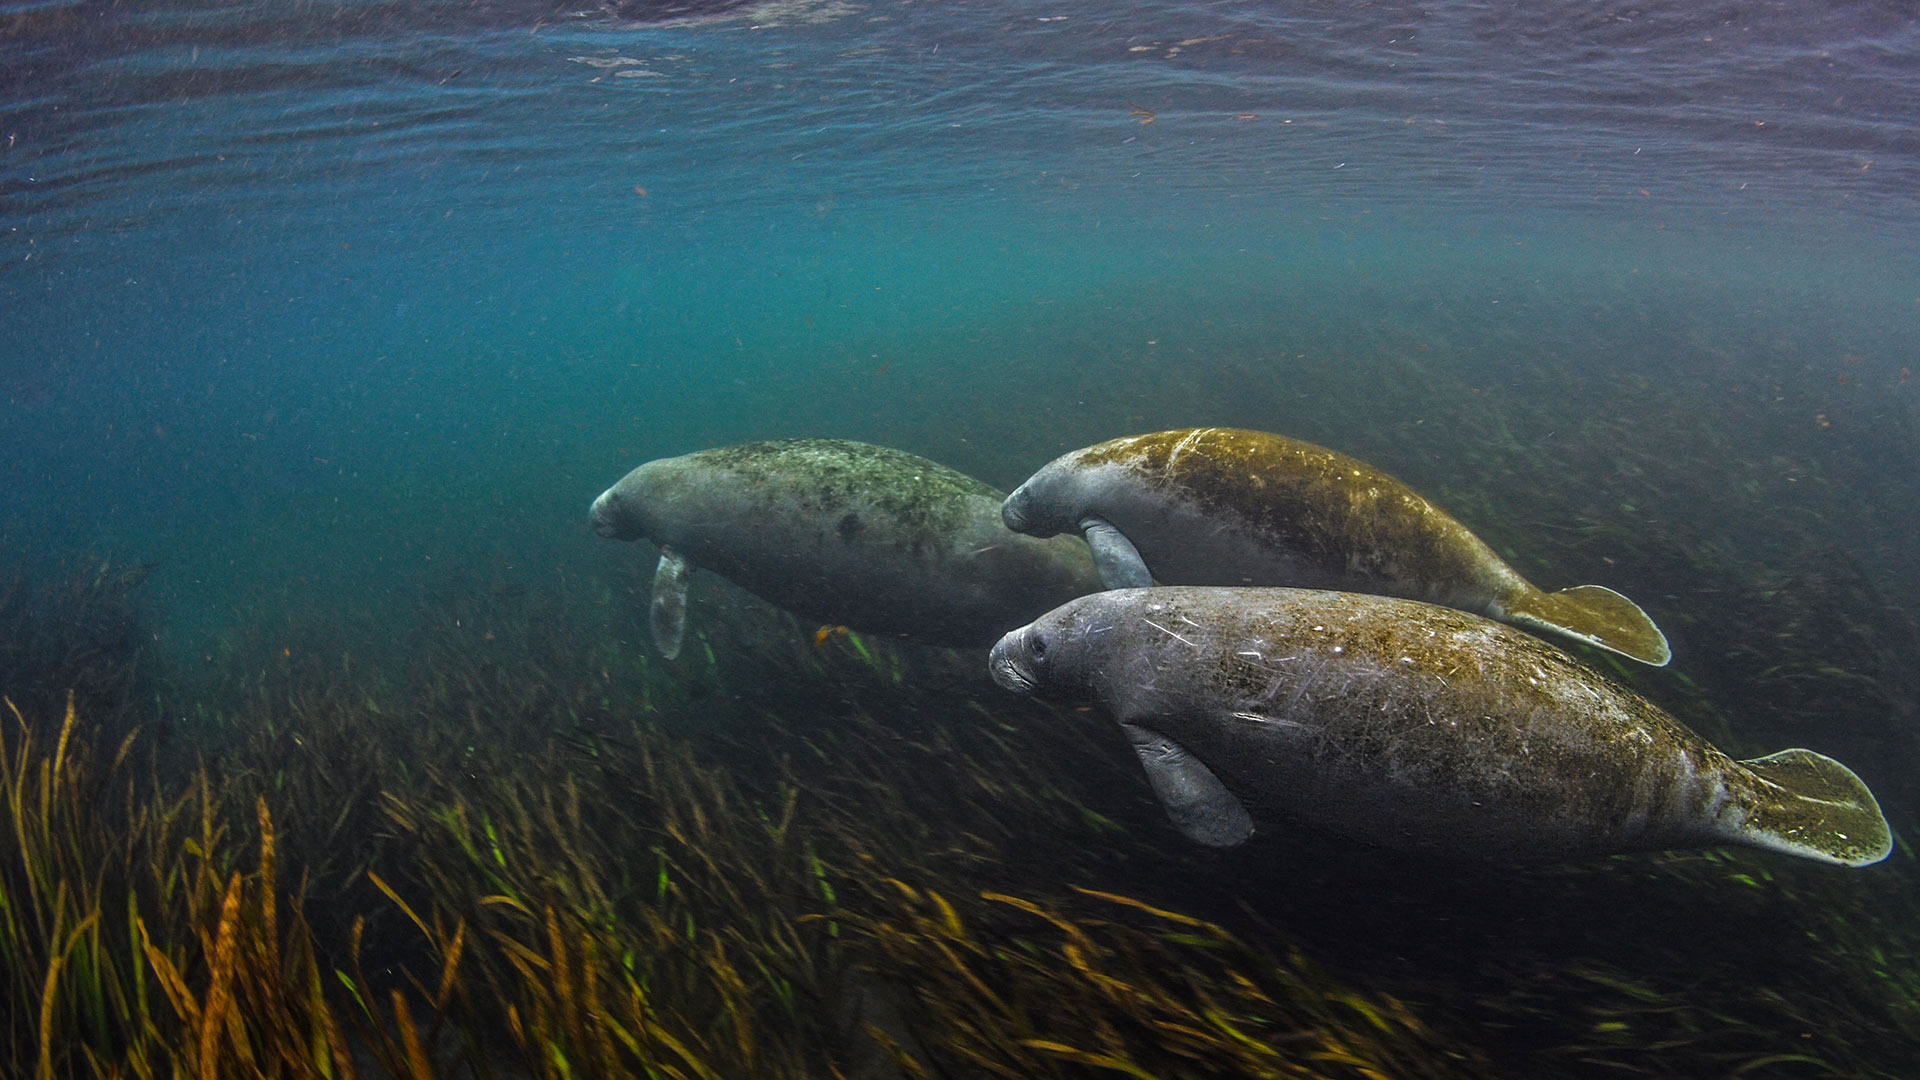 Swimming with the sea cows